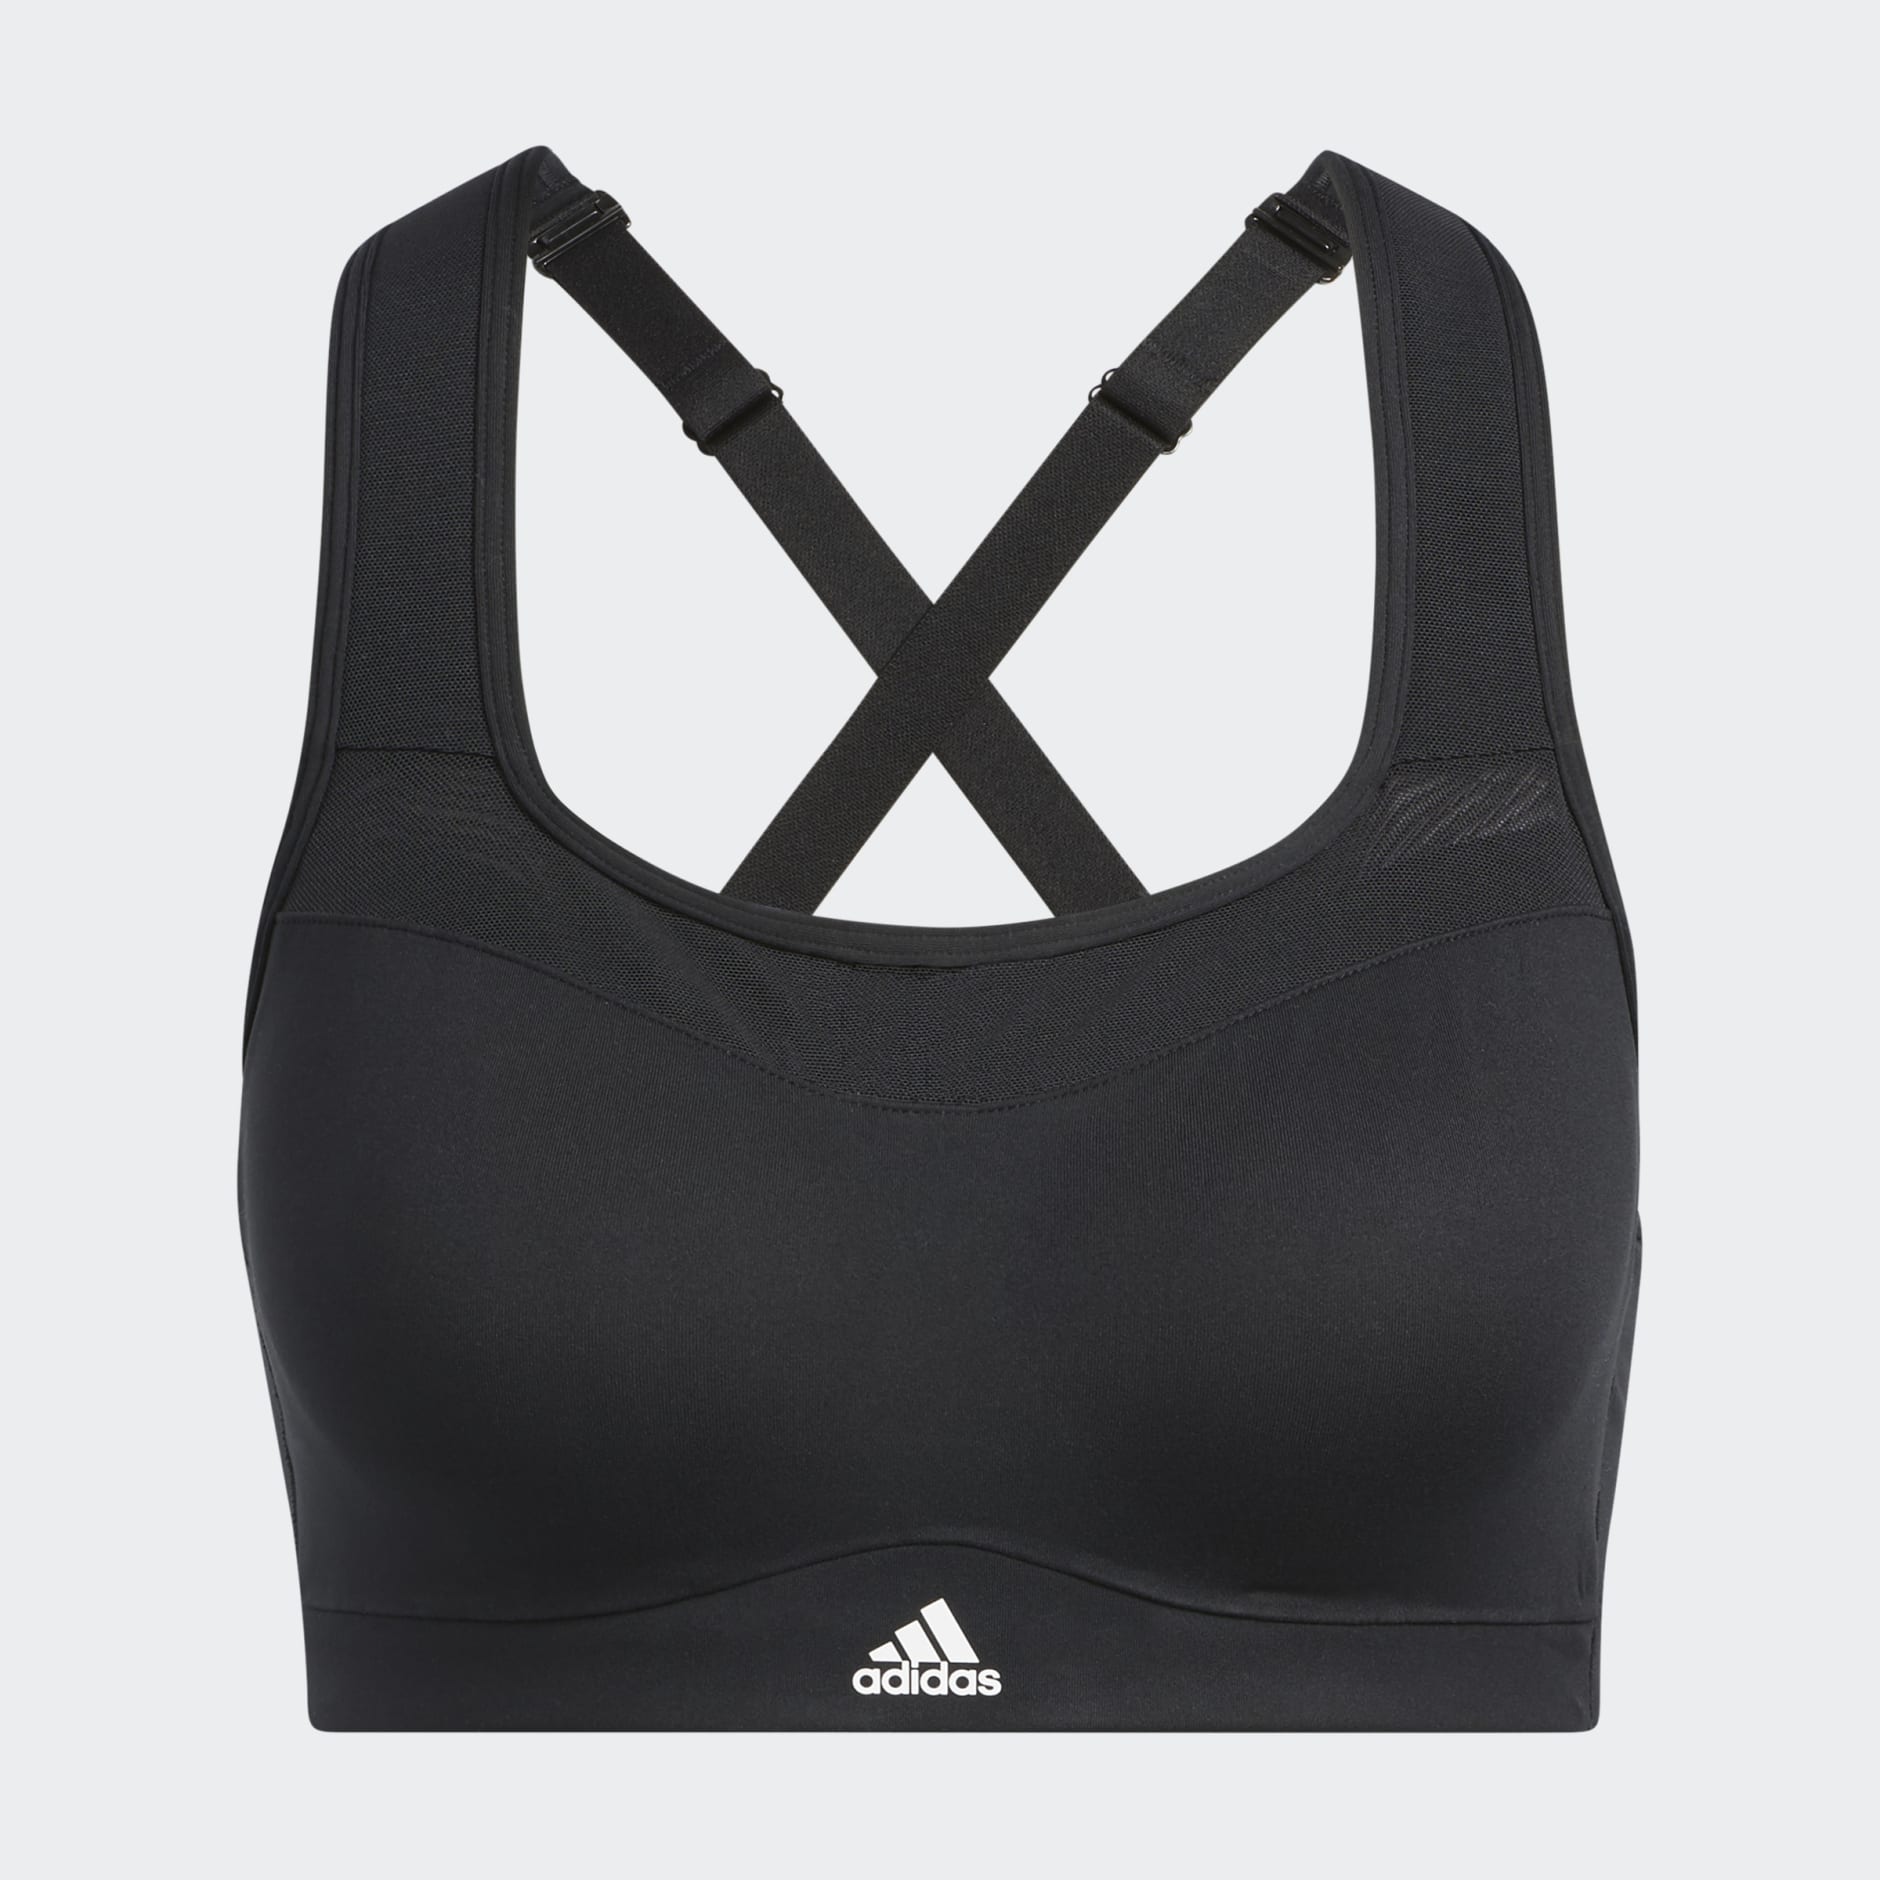 Women's Clothing - adidas TLRD Impact Training High-Support Bra